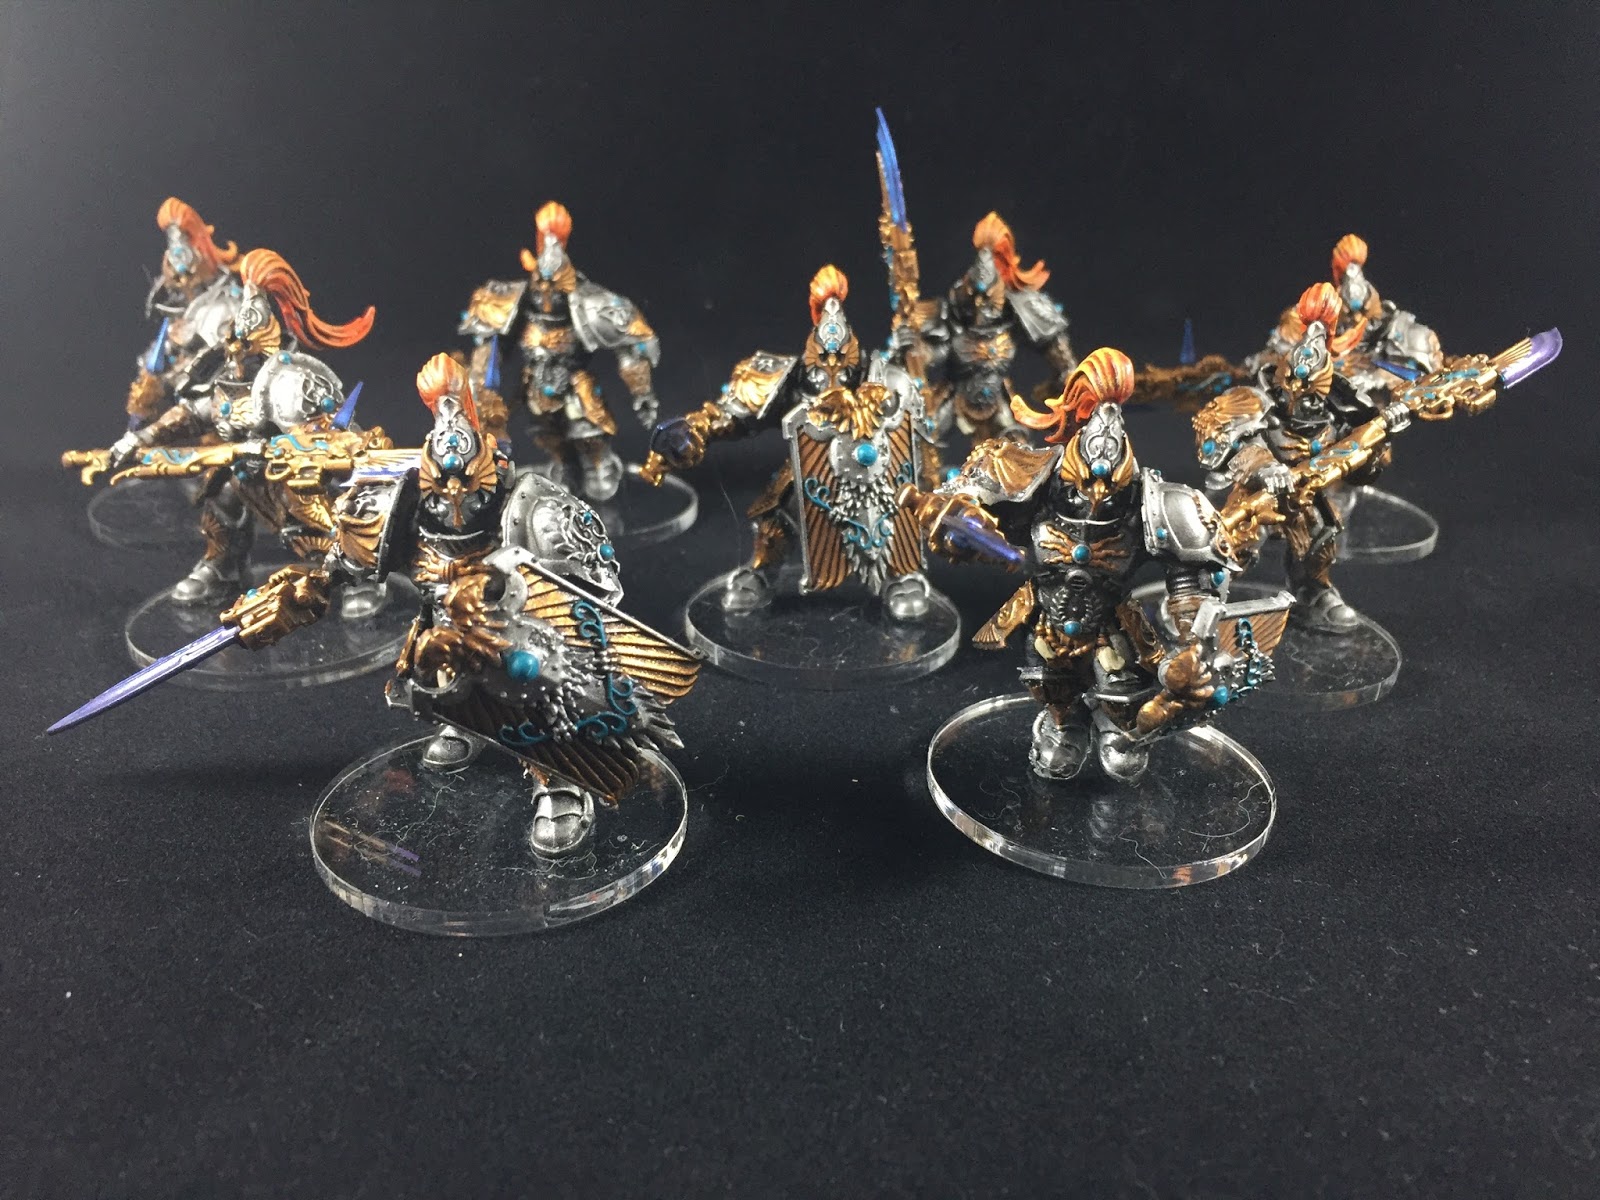 What's On Your Table: Adeptus Custodes.